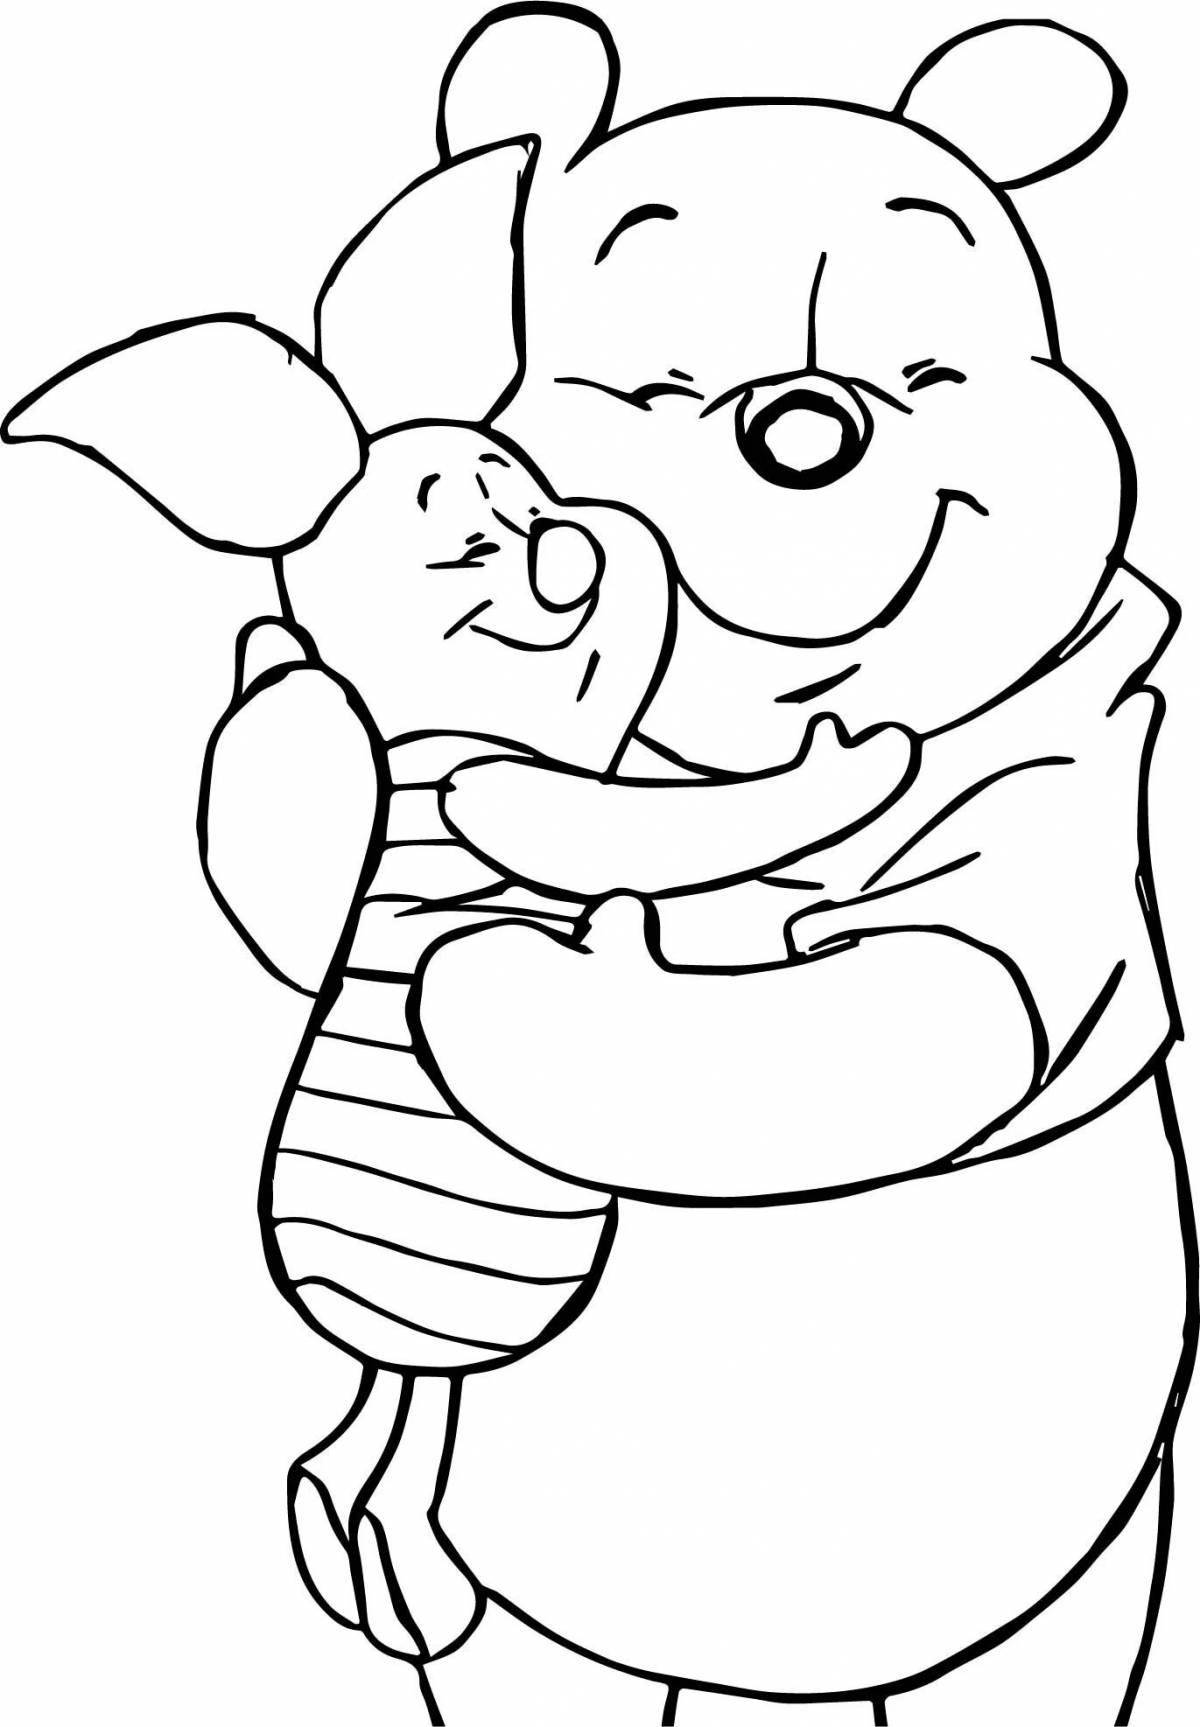 Hug day coloring book for kids